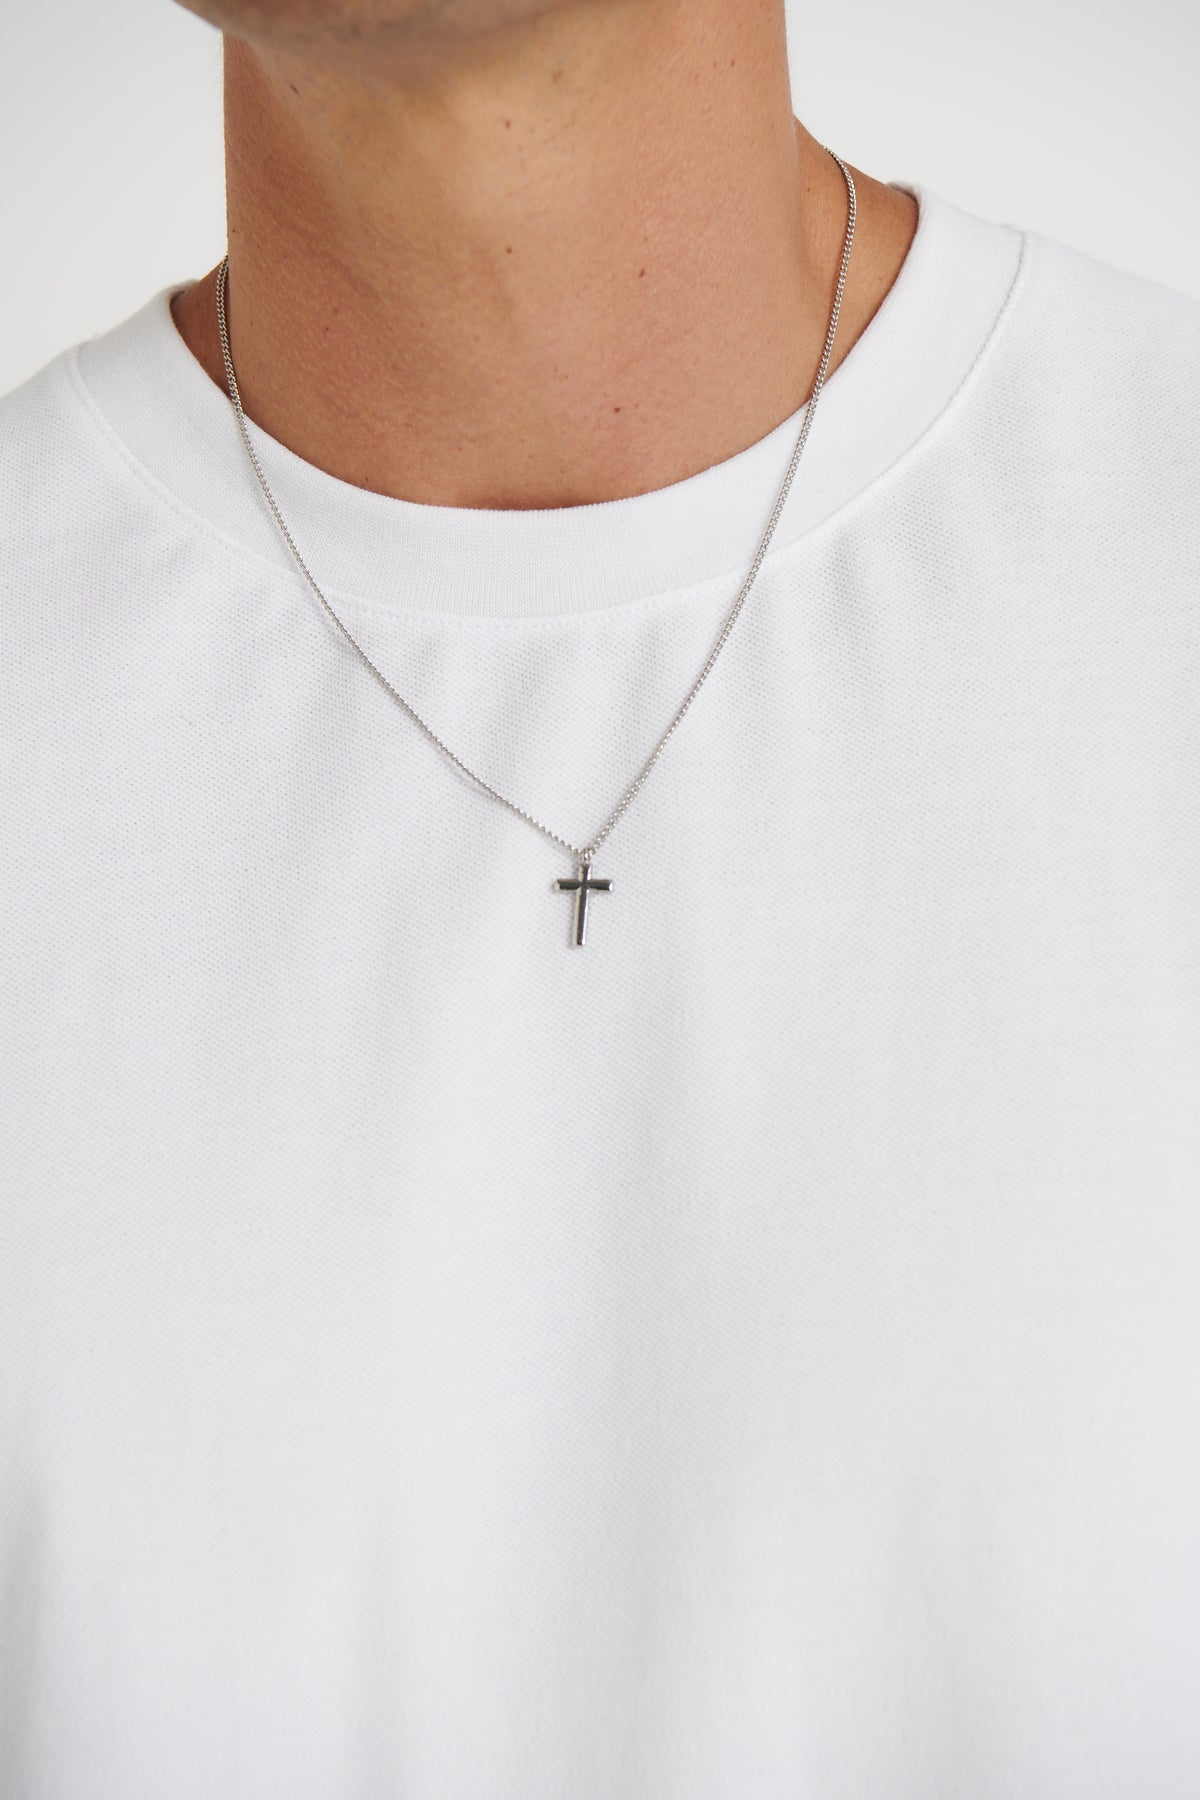 NTH Cross Pendant Necklace Silver